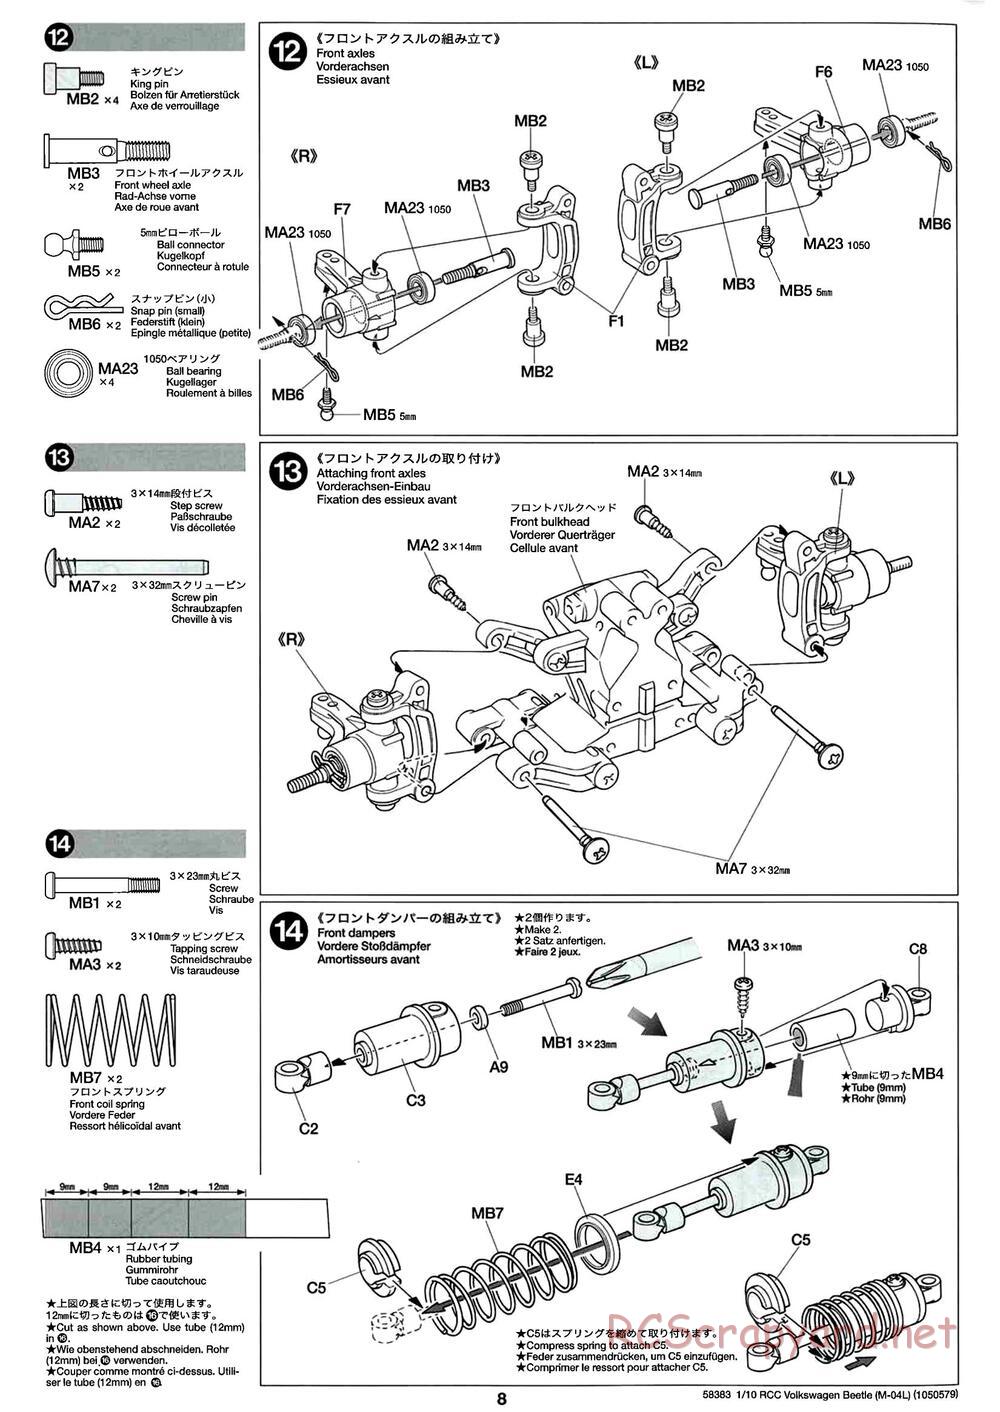 Tamiya - Volkswagen Beetle - M04L Chassis - Manual - Page 8